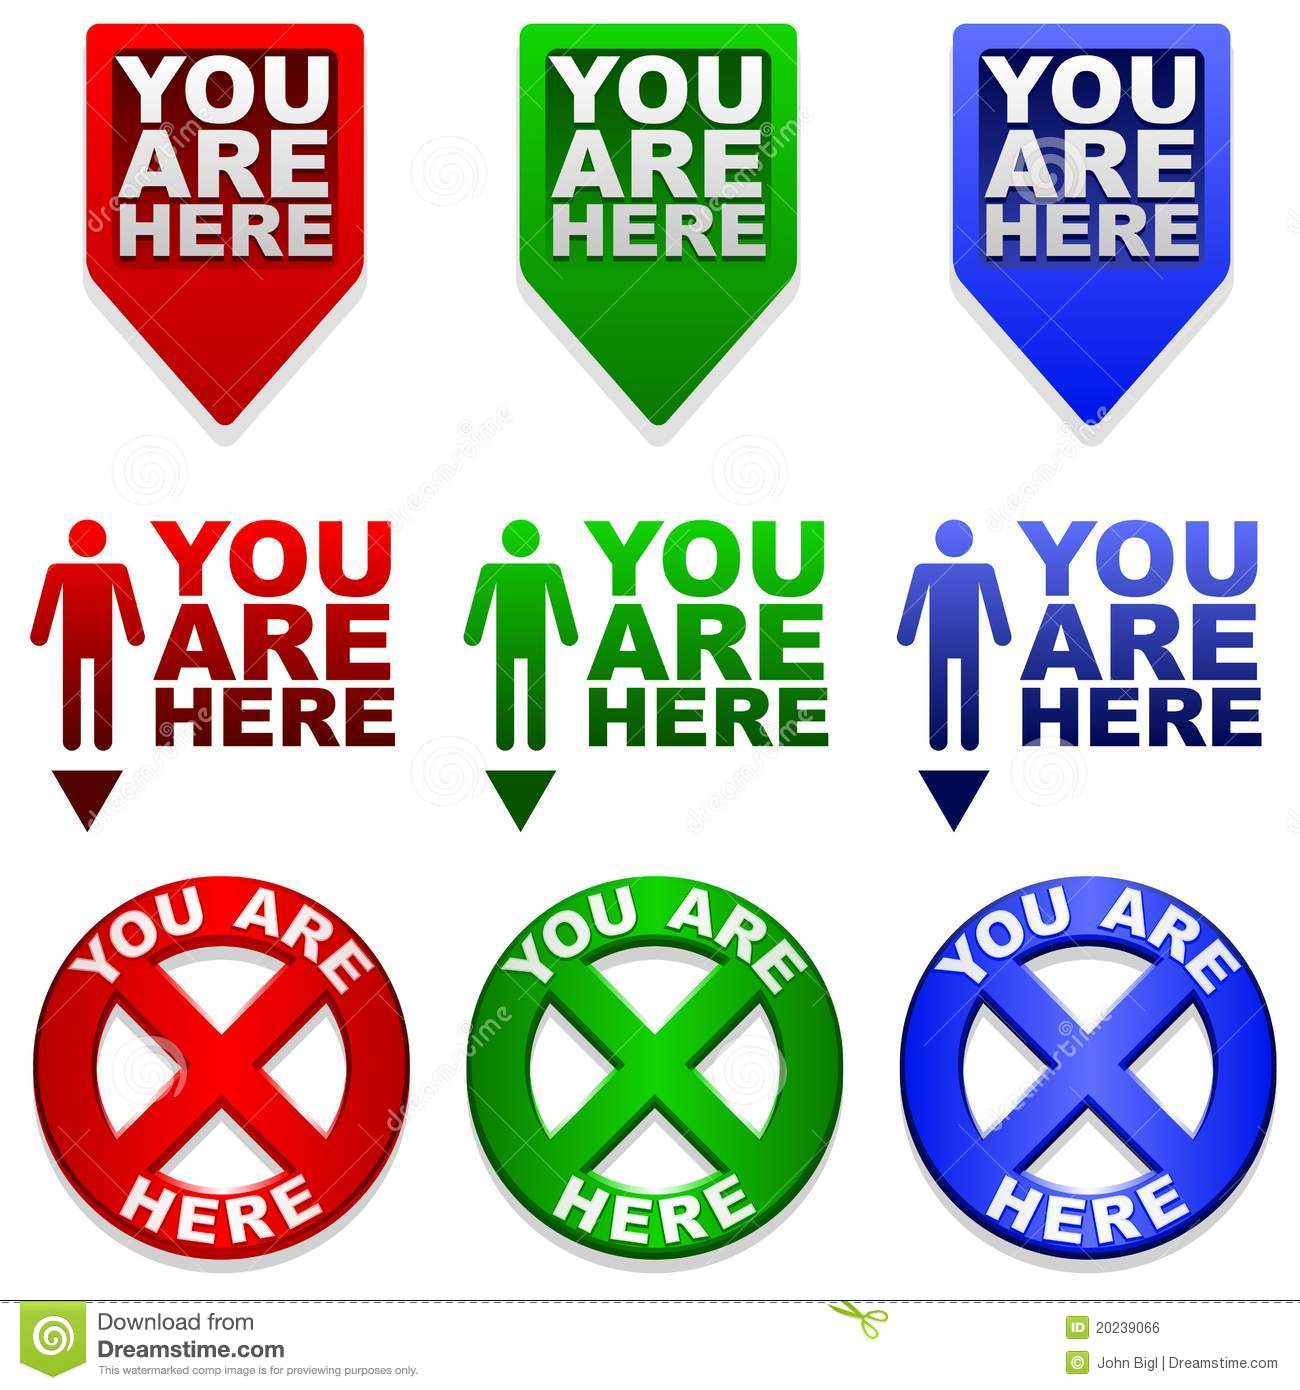 You Are Here Map Markers Royalty Free Stock Image   Image  20239066